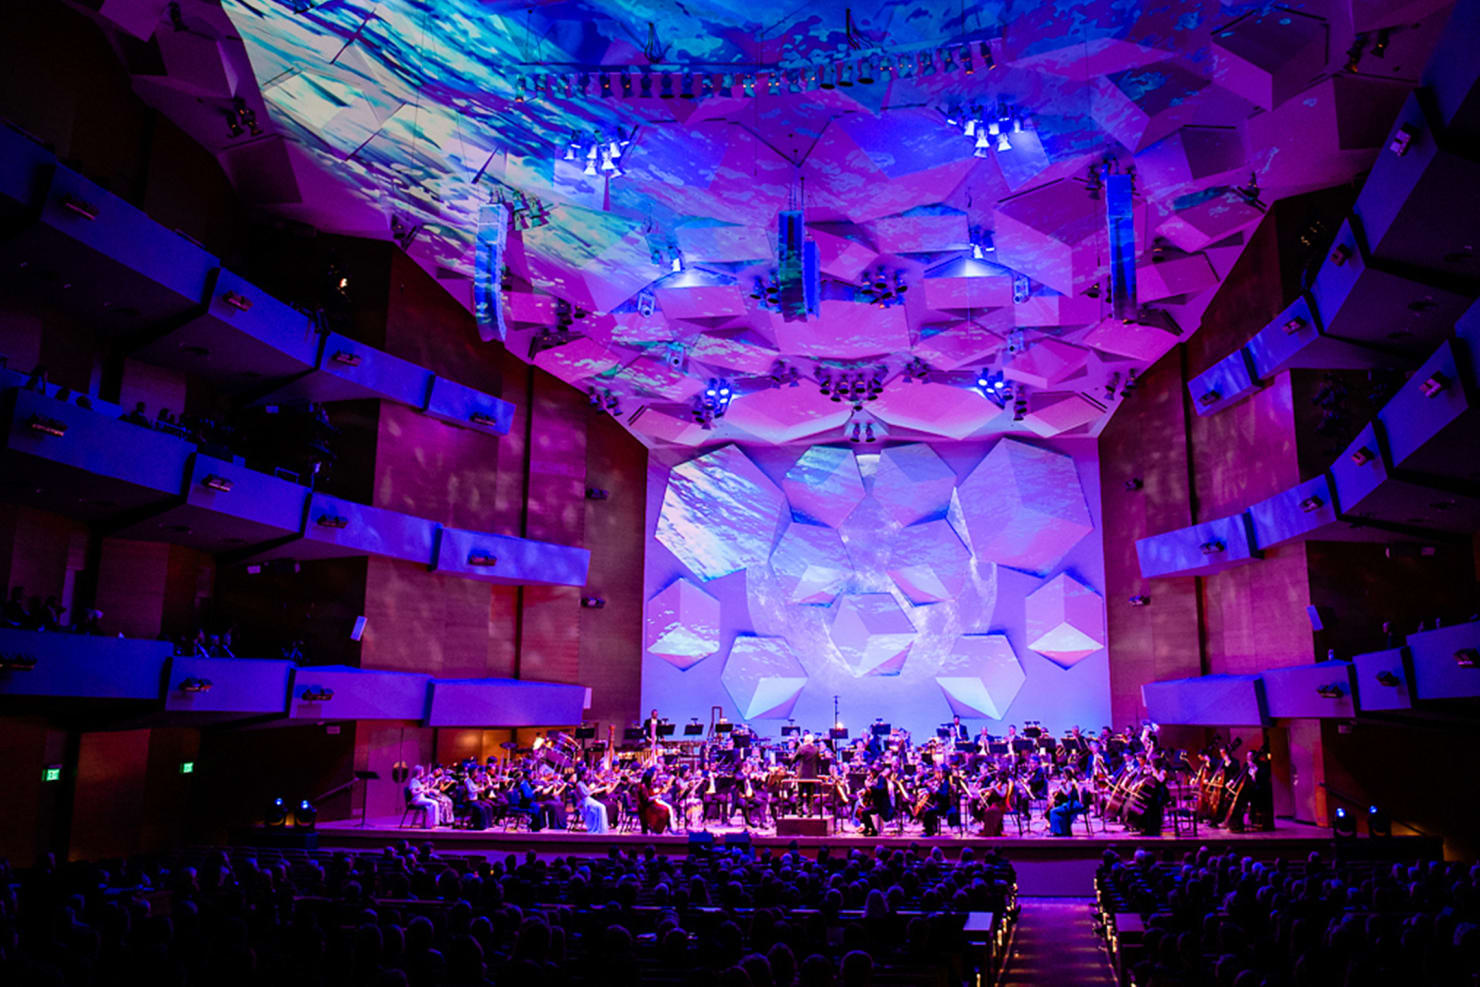 Performance at Orchestra Hall with purple and blue lighting